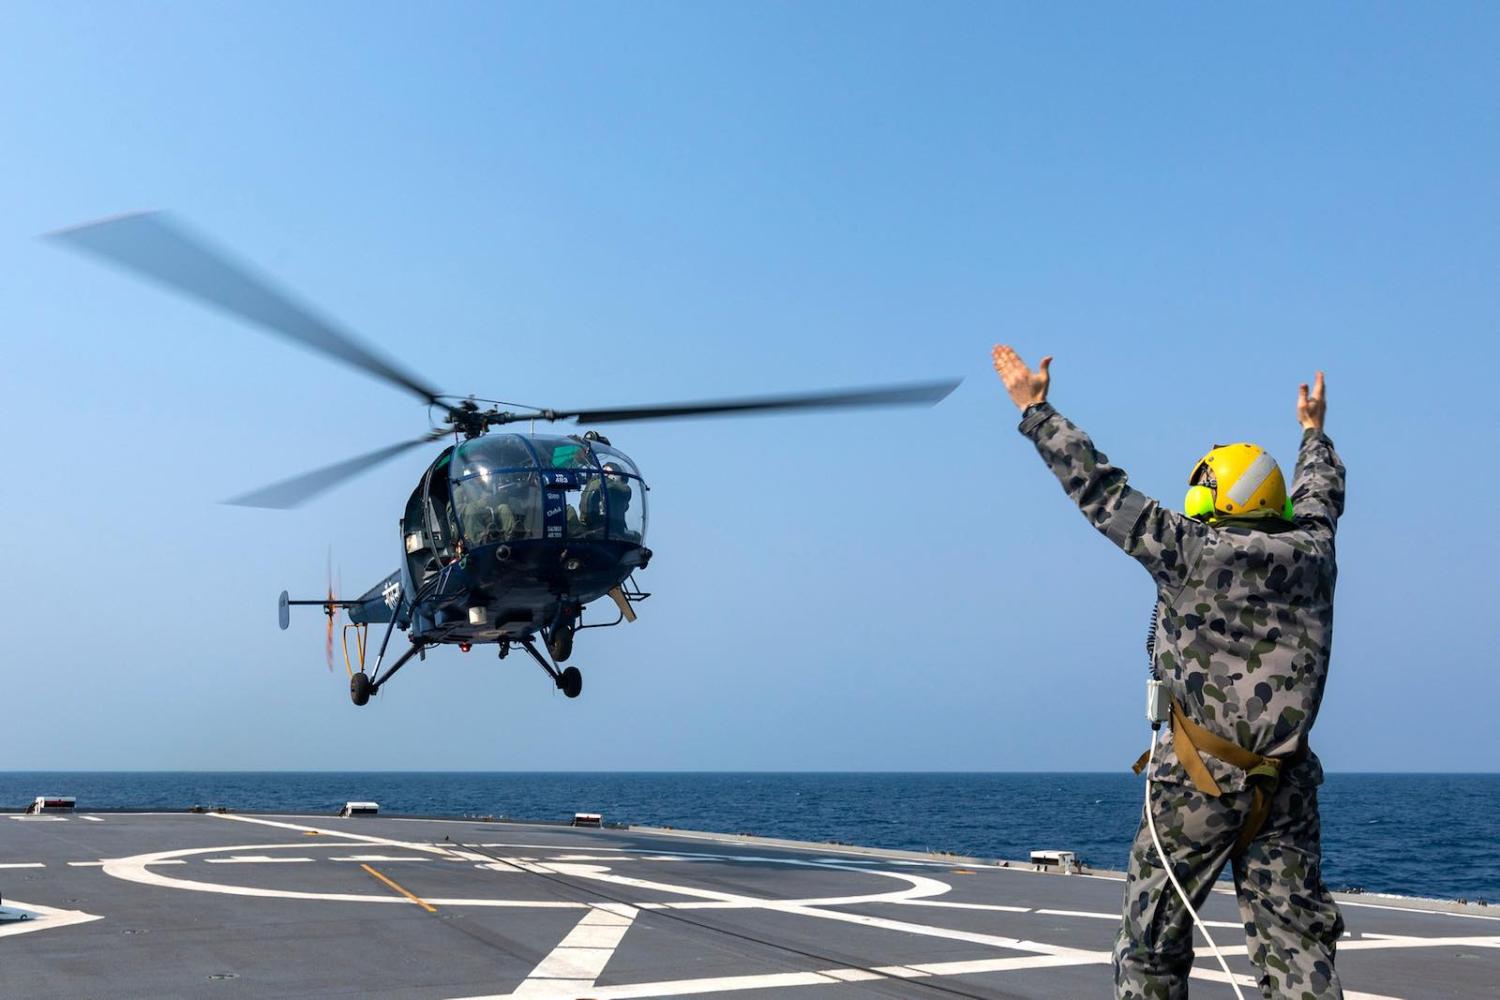 An Indian Navy Chetak helicopter lifts off from HMAS Parramatta during AUSINDEX 2019, in the Bay of Bengal (Australian Defence Force)